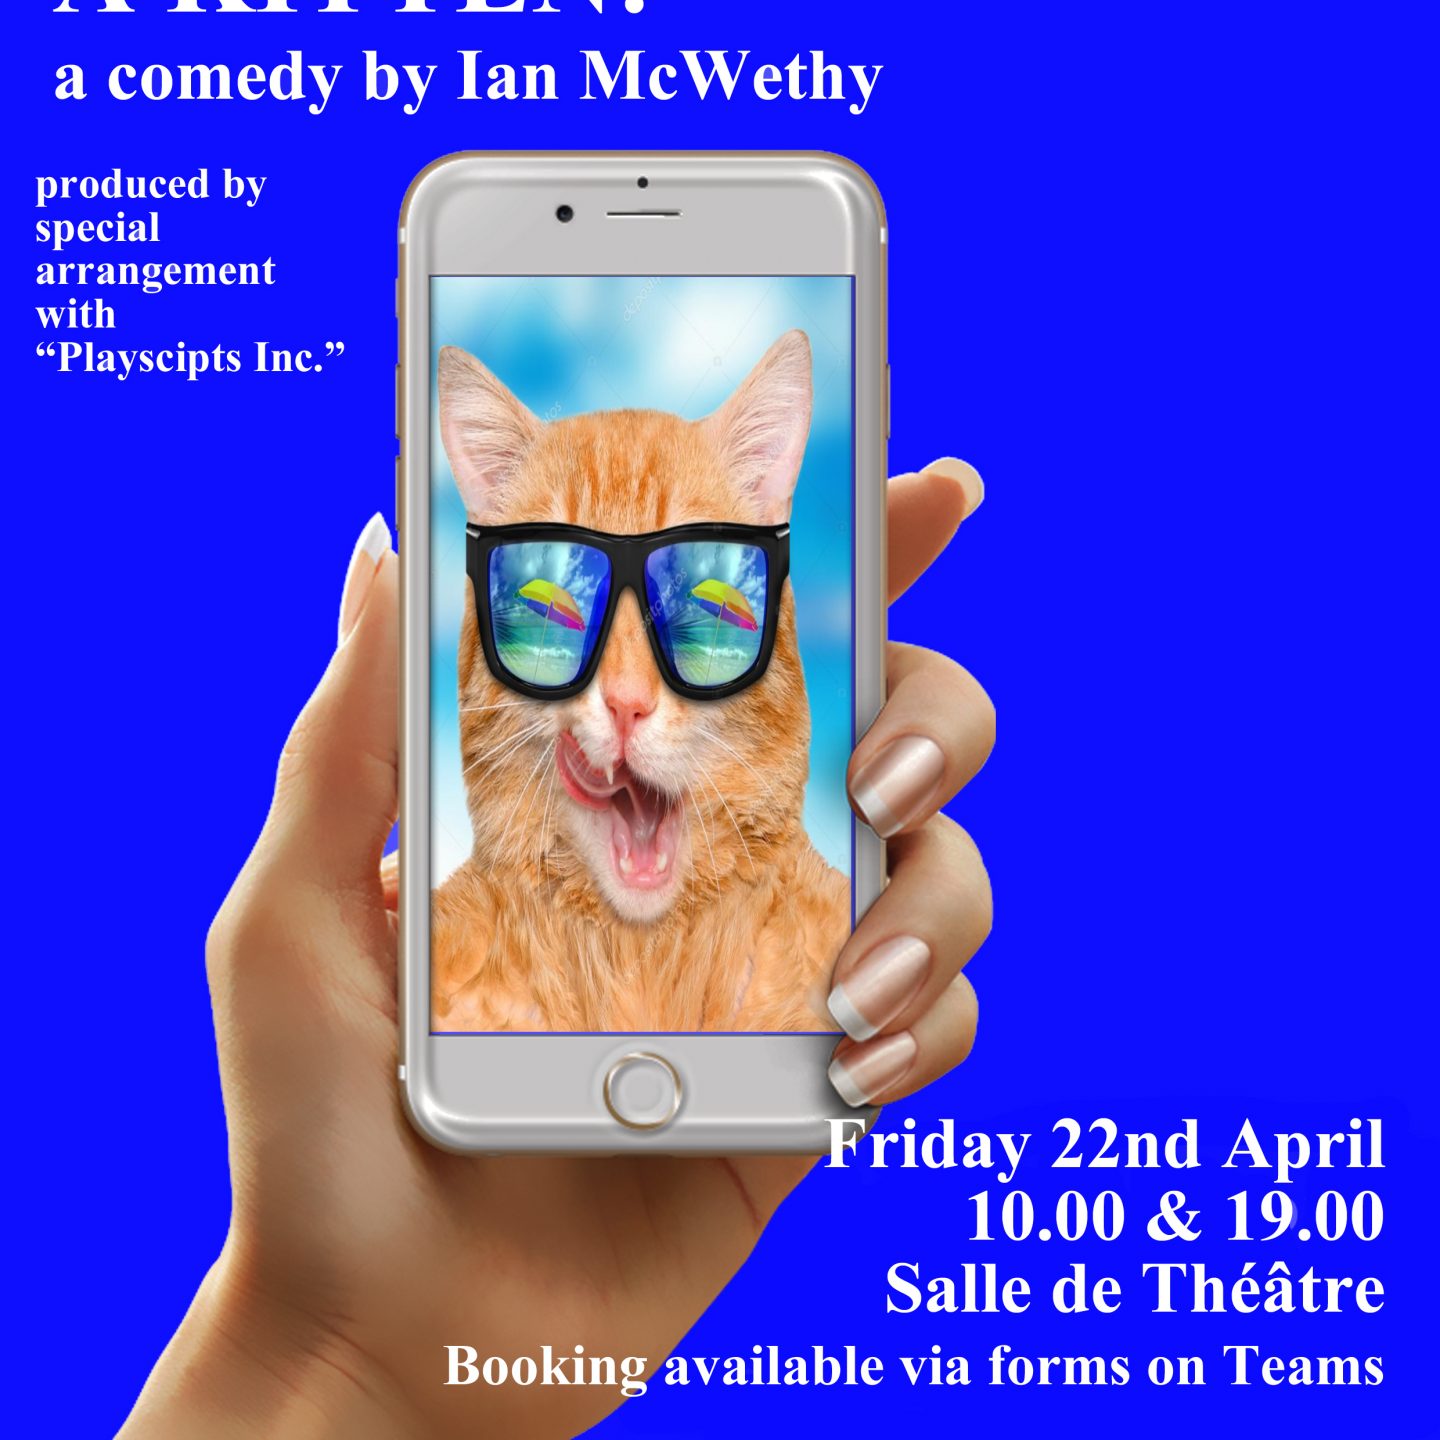 For its tenth anniversary the LMRL English Drama group proudly presents their play on 22nd April at 7pm. The show will be performed at the small school theatre.